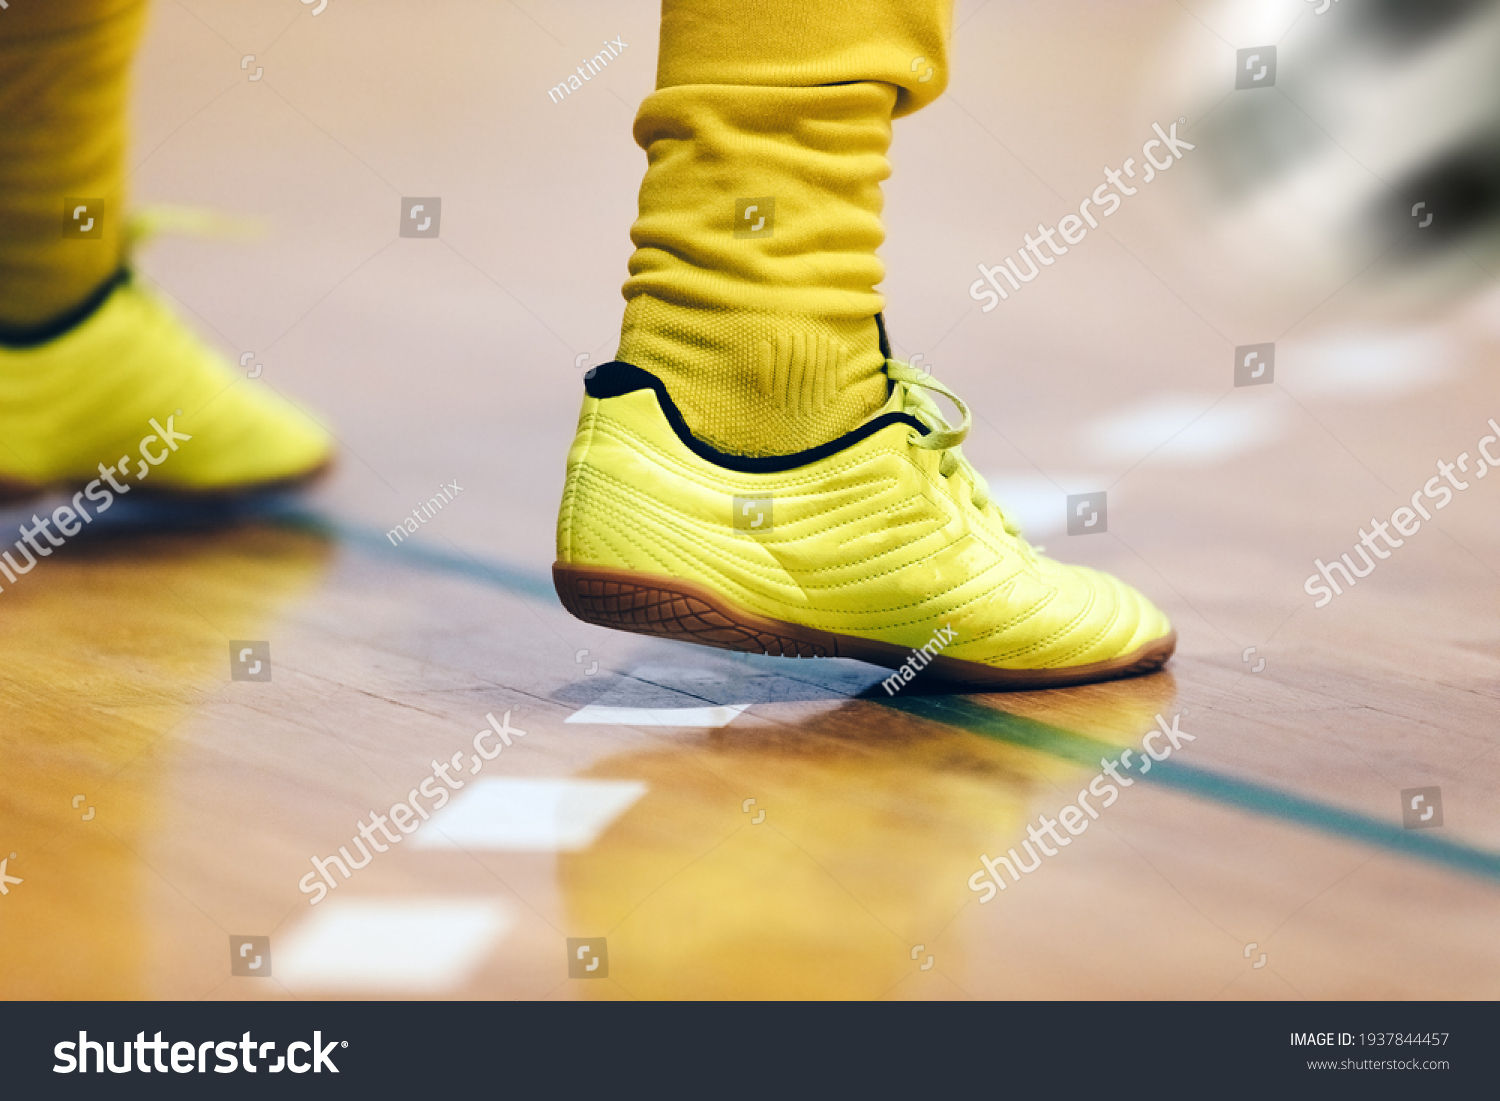 Indoor football player and classic ball. Futsal training for children. Legs of young futsal player in soccer cleats and socks. Indoor sports hall. Player in uniform. Junior level sport background #1937844457